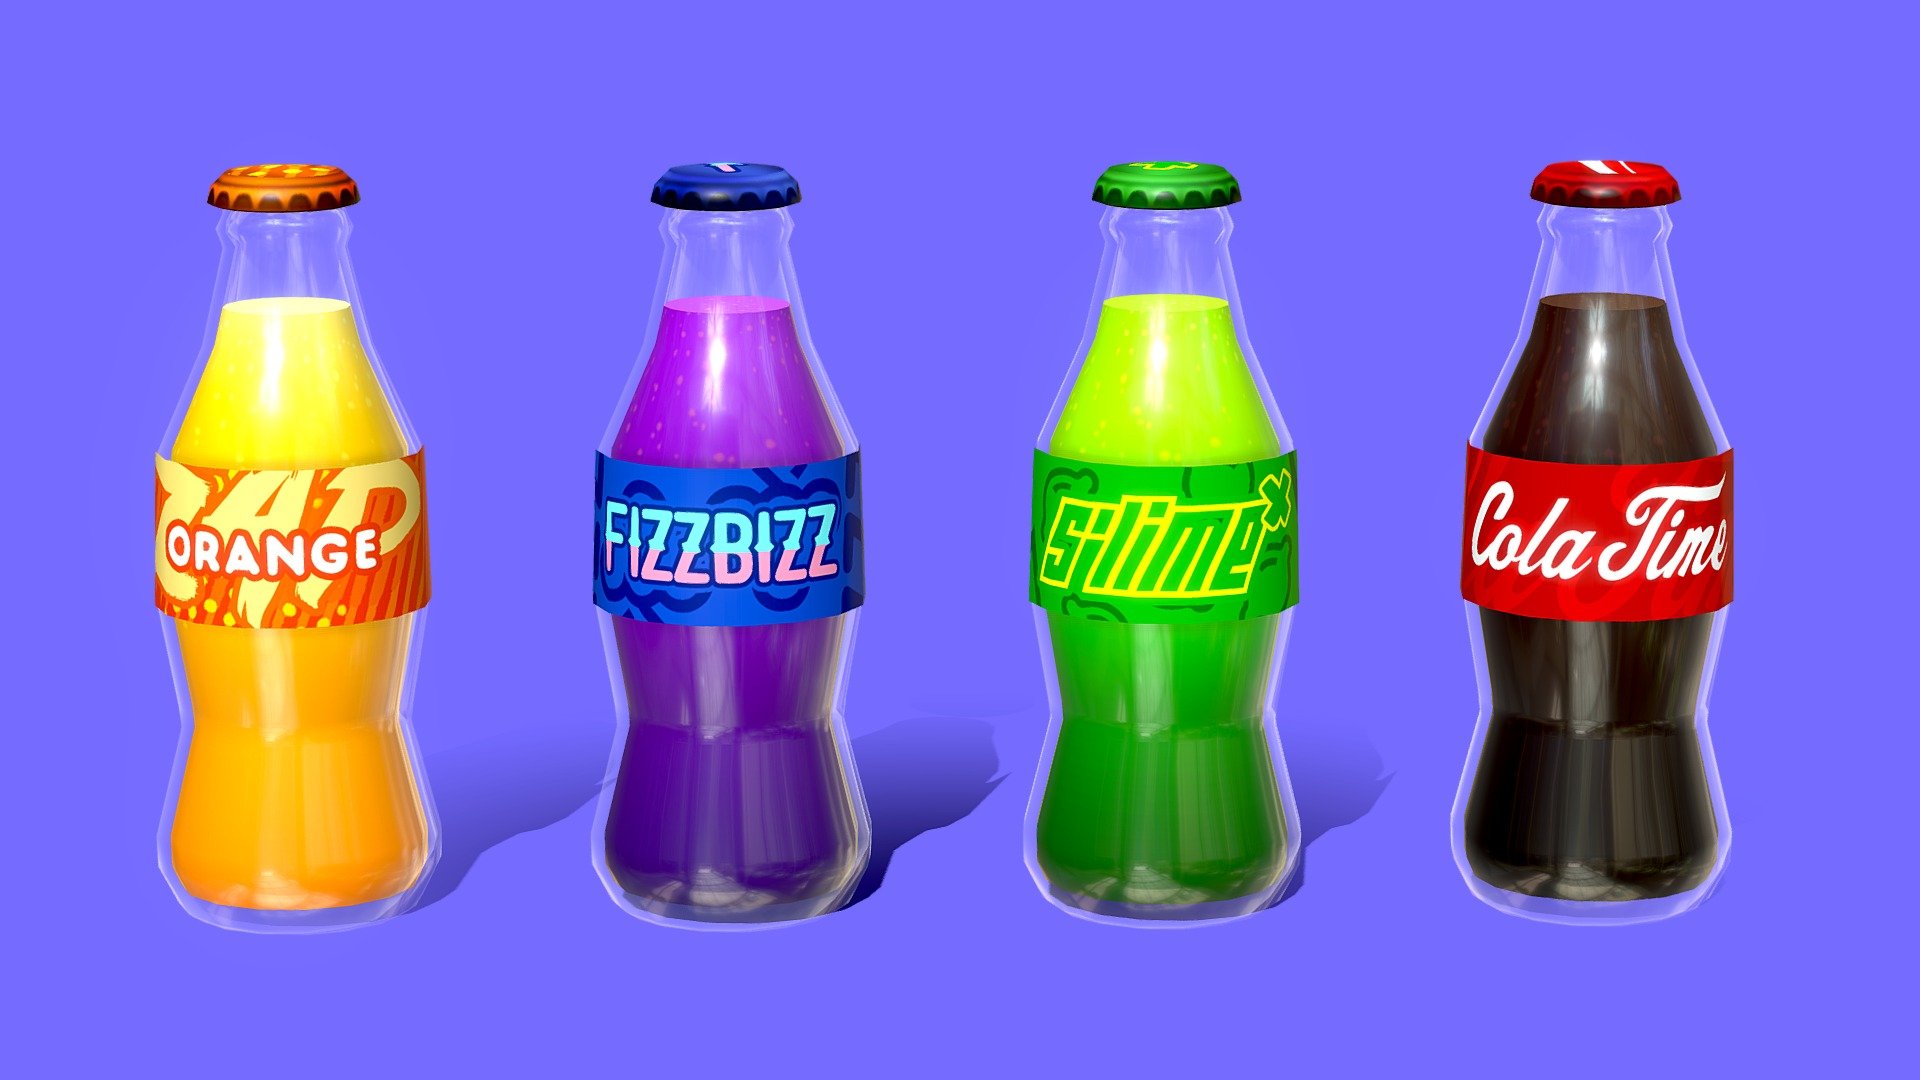 Four soda bottles to stock your virtual fridge with!




Each bottle is modular - bottle caps, labels and liquid can all be removed or customized 

All labels are a unique design

Models use 1024x1024 diffuse textures 

Lowpoly and handpainted 

Make sure to check out my other assets! Every asset is modeled and painted in the same style so your game or project will maintain a cohesive and unique style with a wide variety of assets to choose from! - Glass Soda Bottles - Buy Royalty Free 3D model by Megan Alcock (@citystreetlight) 3d model